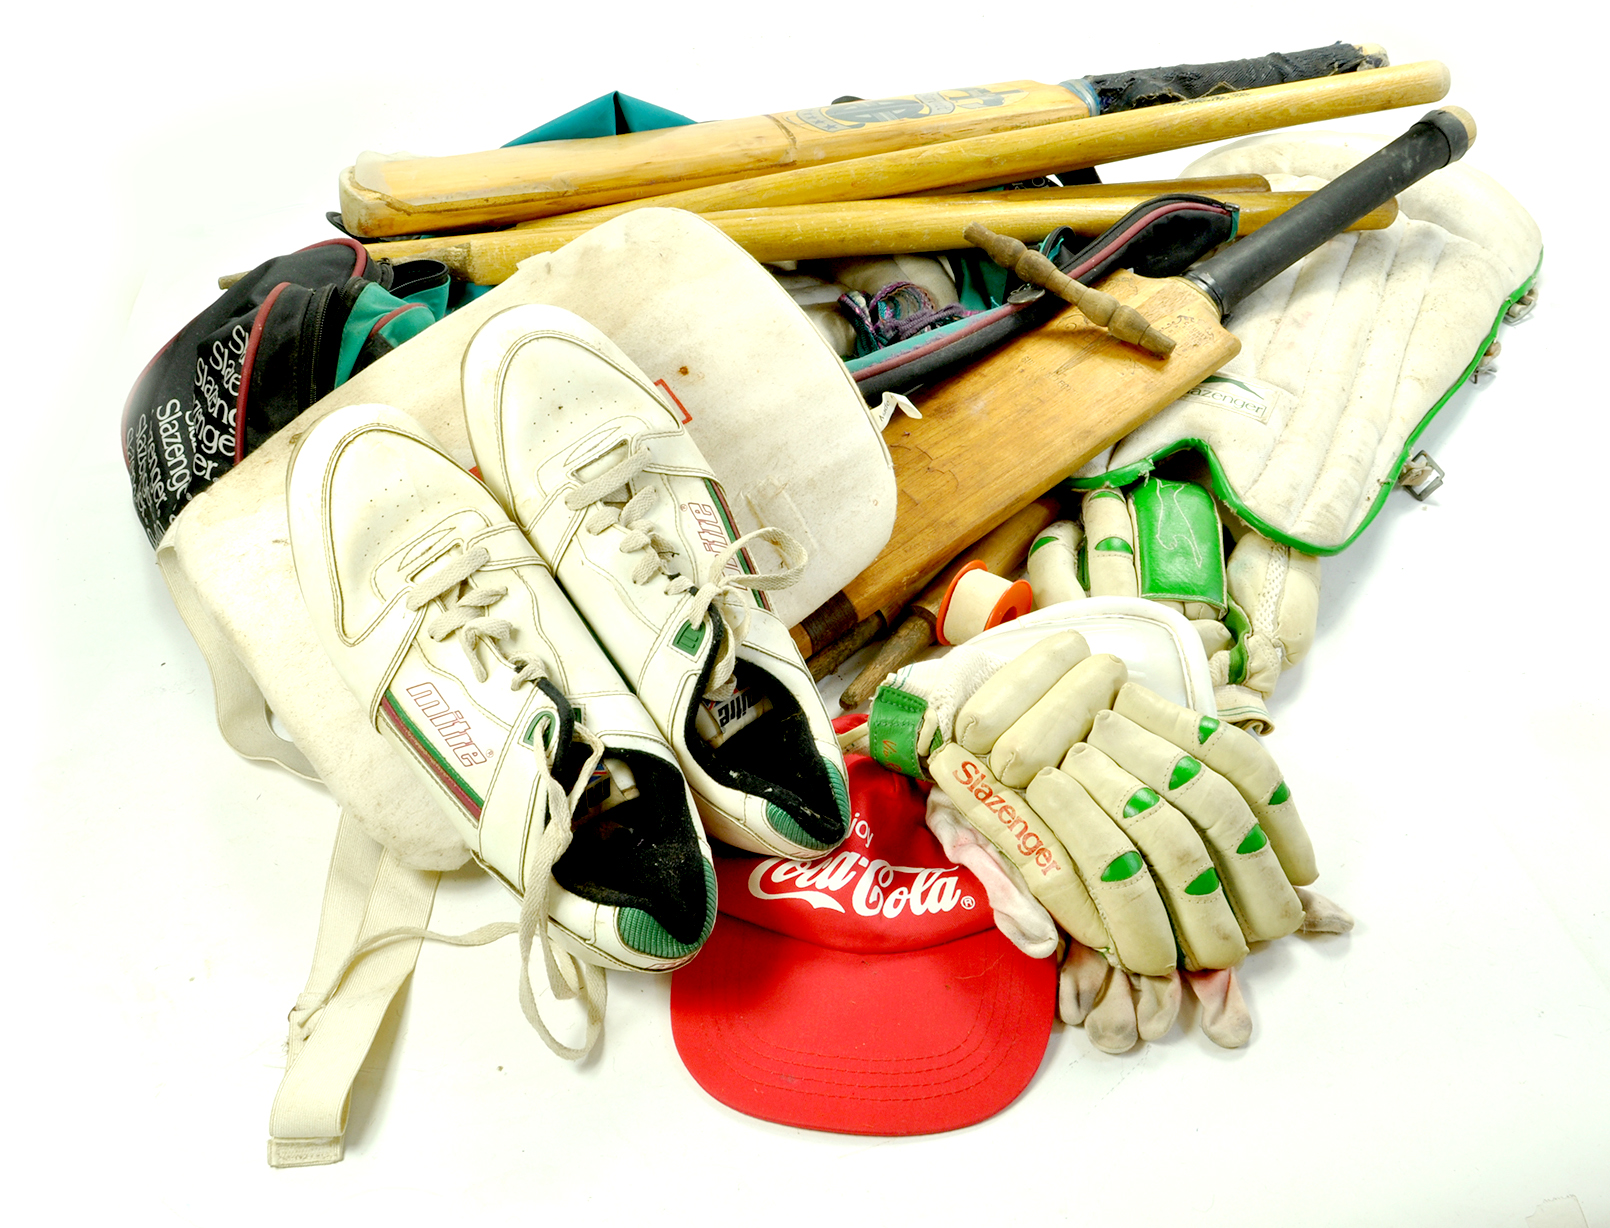 A 1980's / 90's group of Cricket Equipment comprising Bag, Bat, Pads, Stumps and other items.